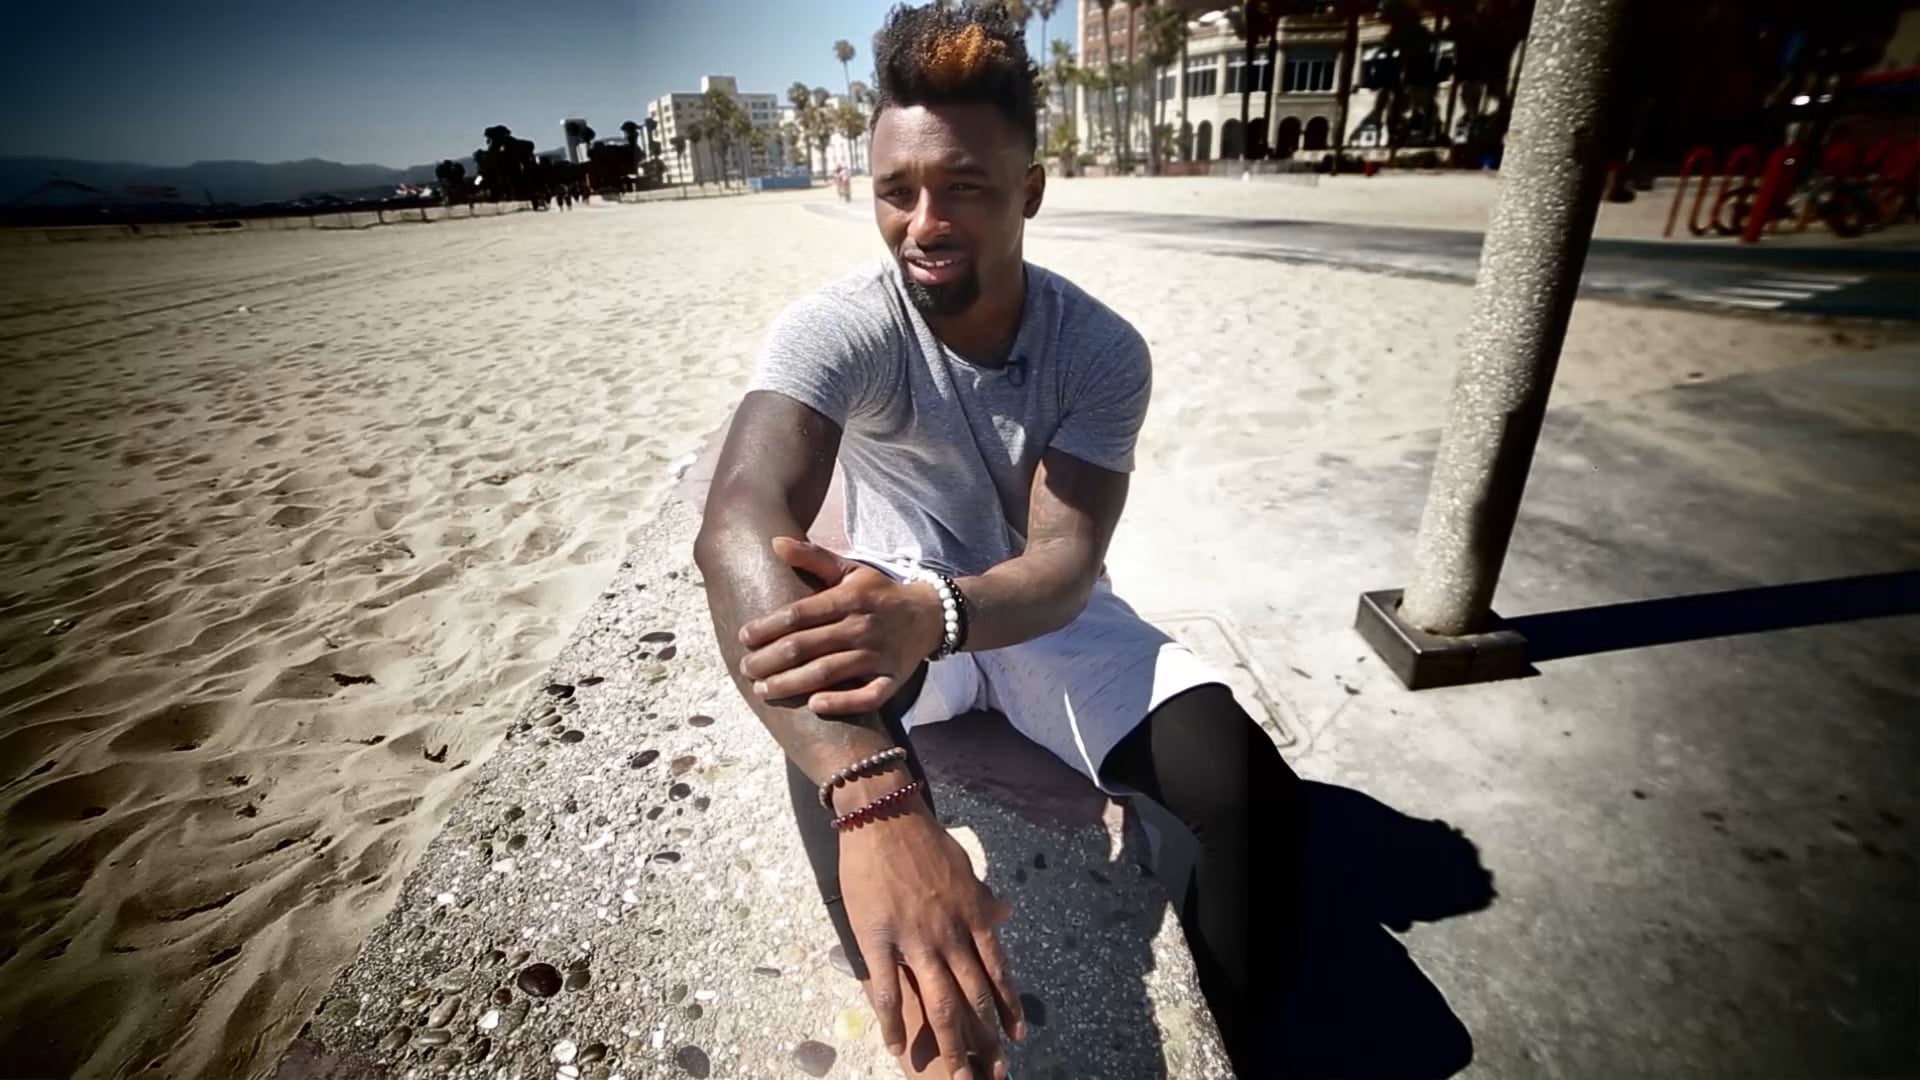 MUSIC MOVES ME - JARVIS LANDRY